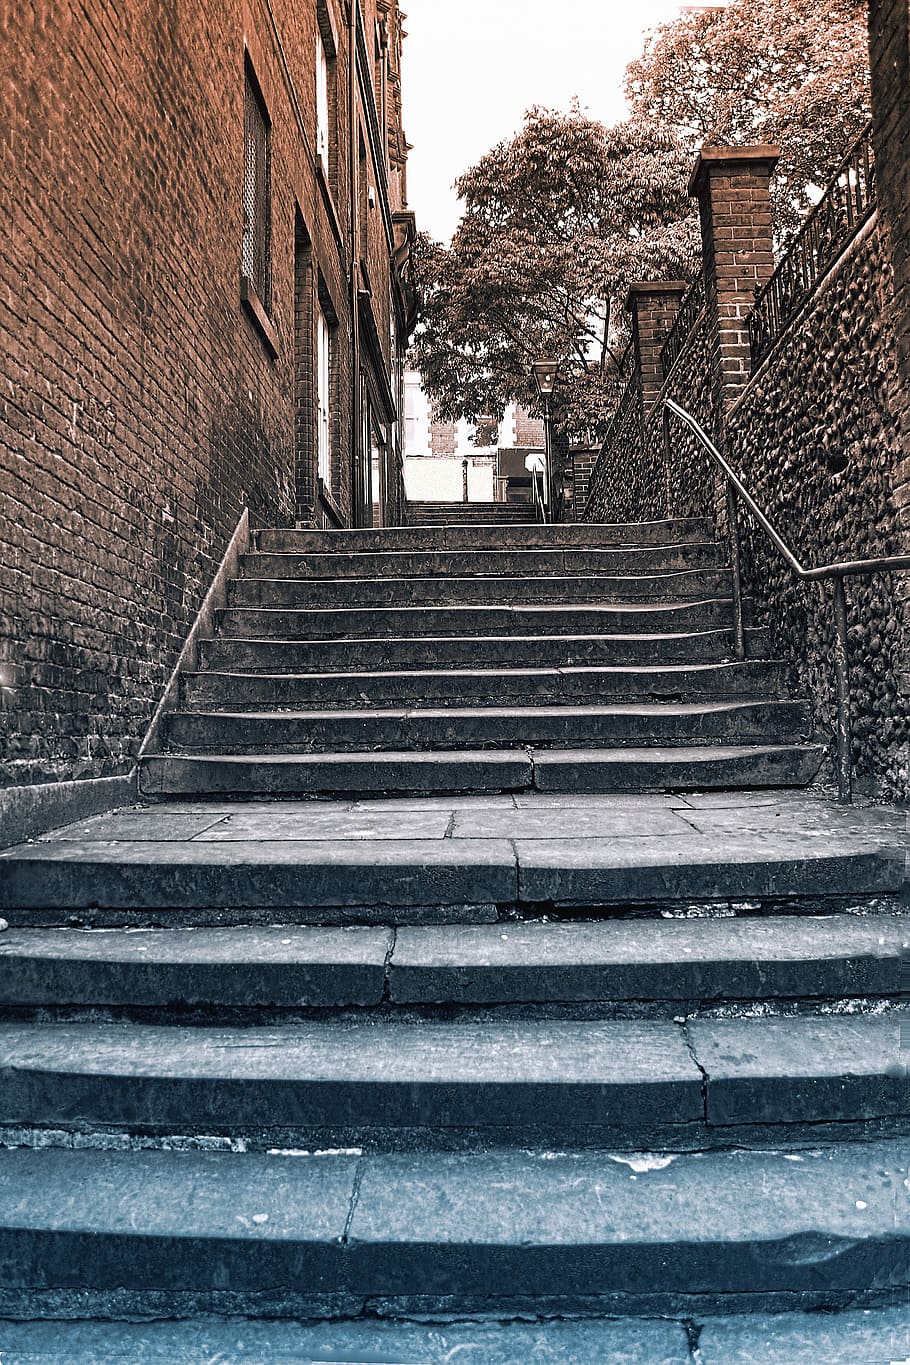 Steps, Old, Street, City, Stone, old, street, urban, outdoor, staircase, architecture